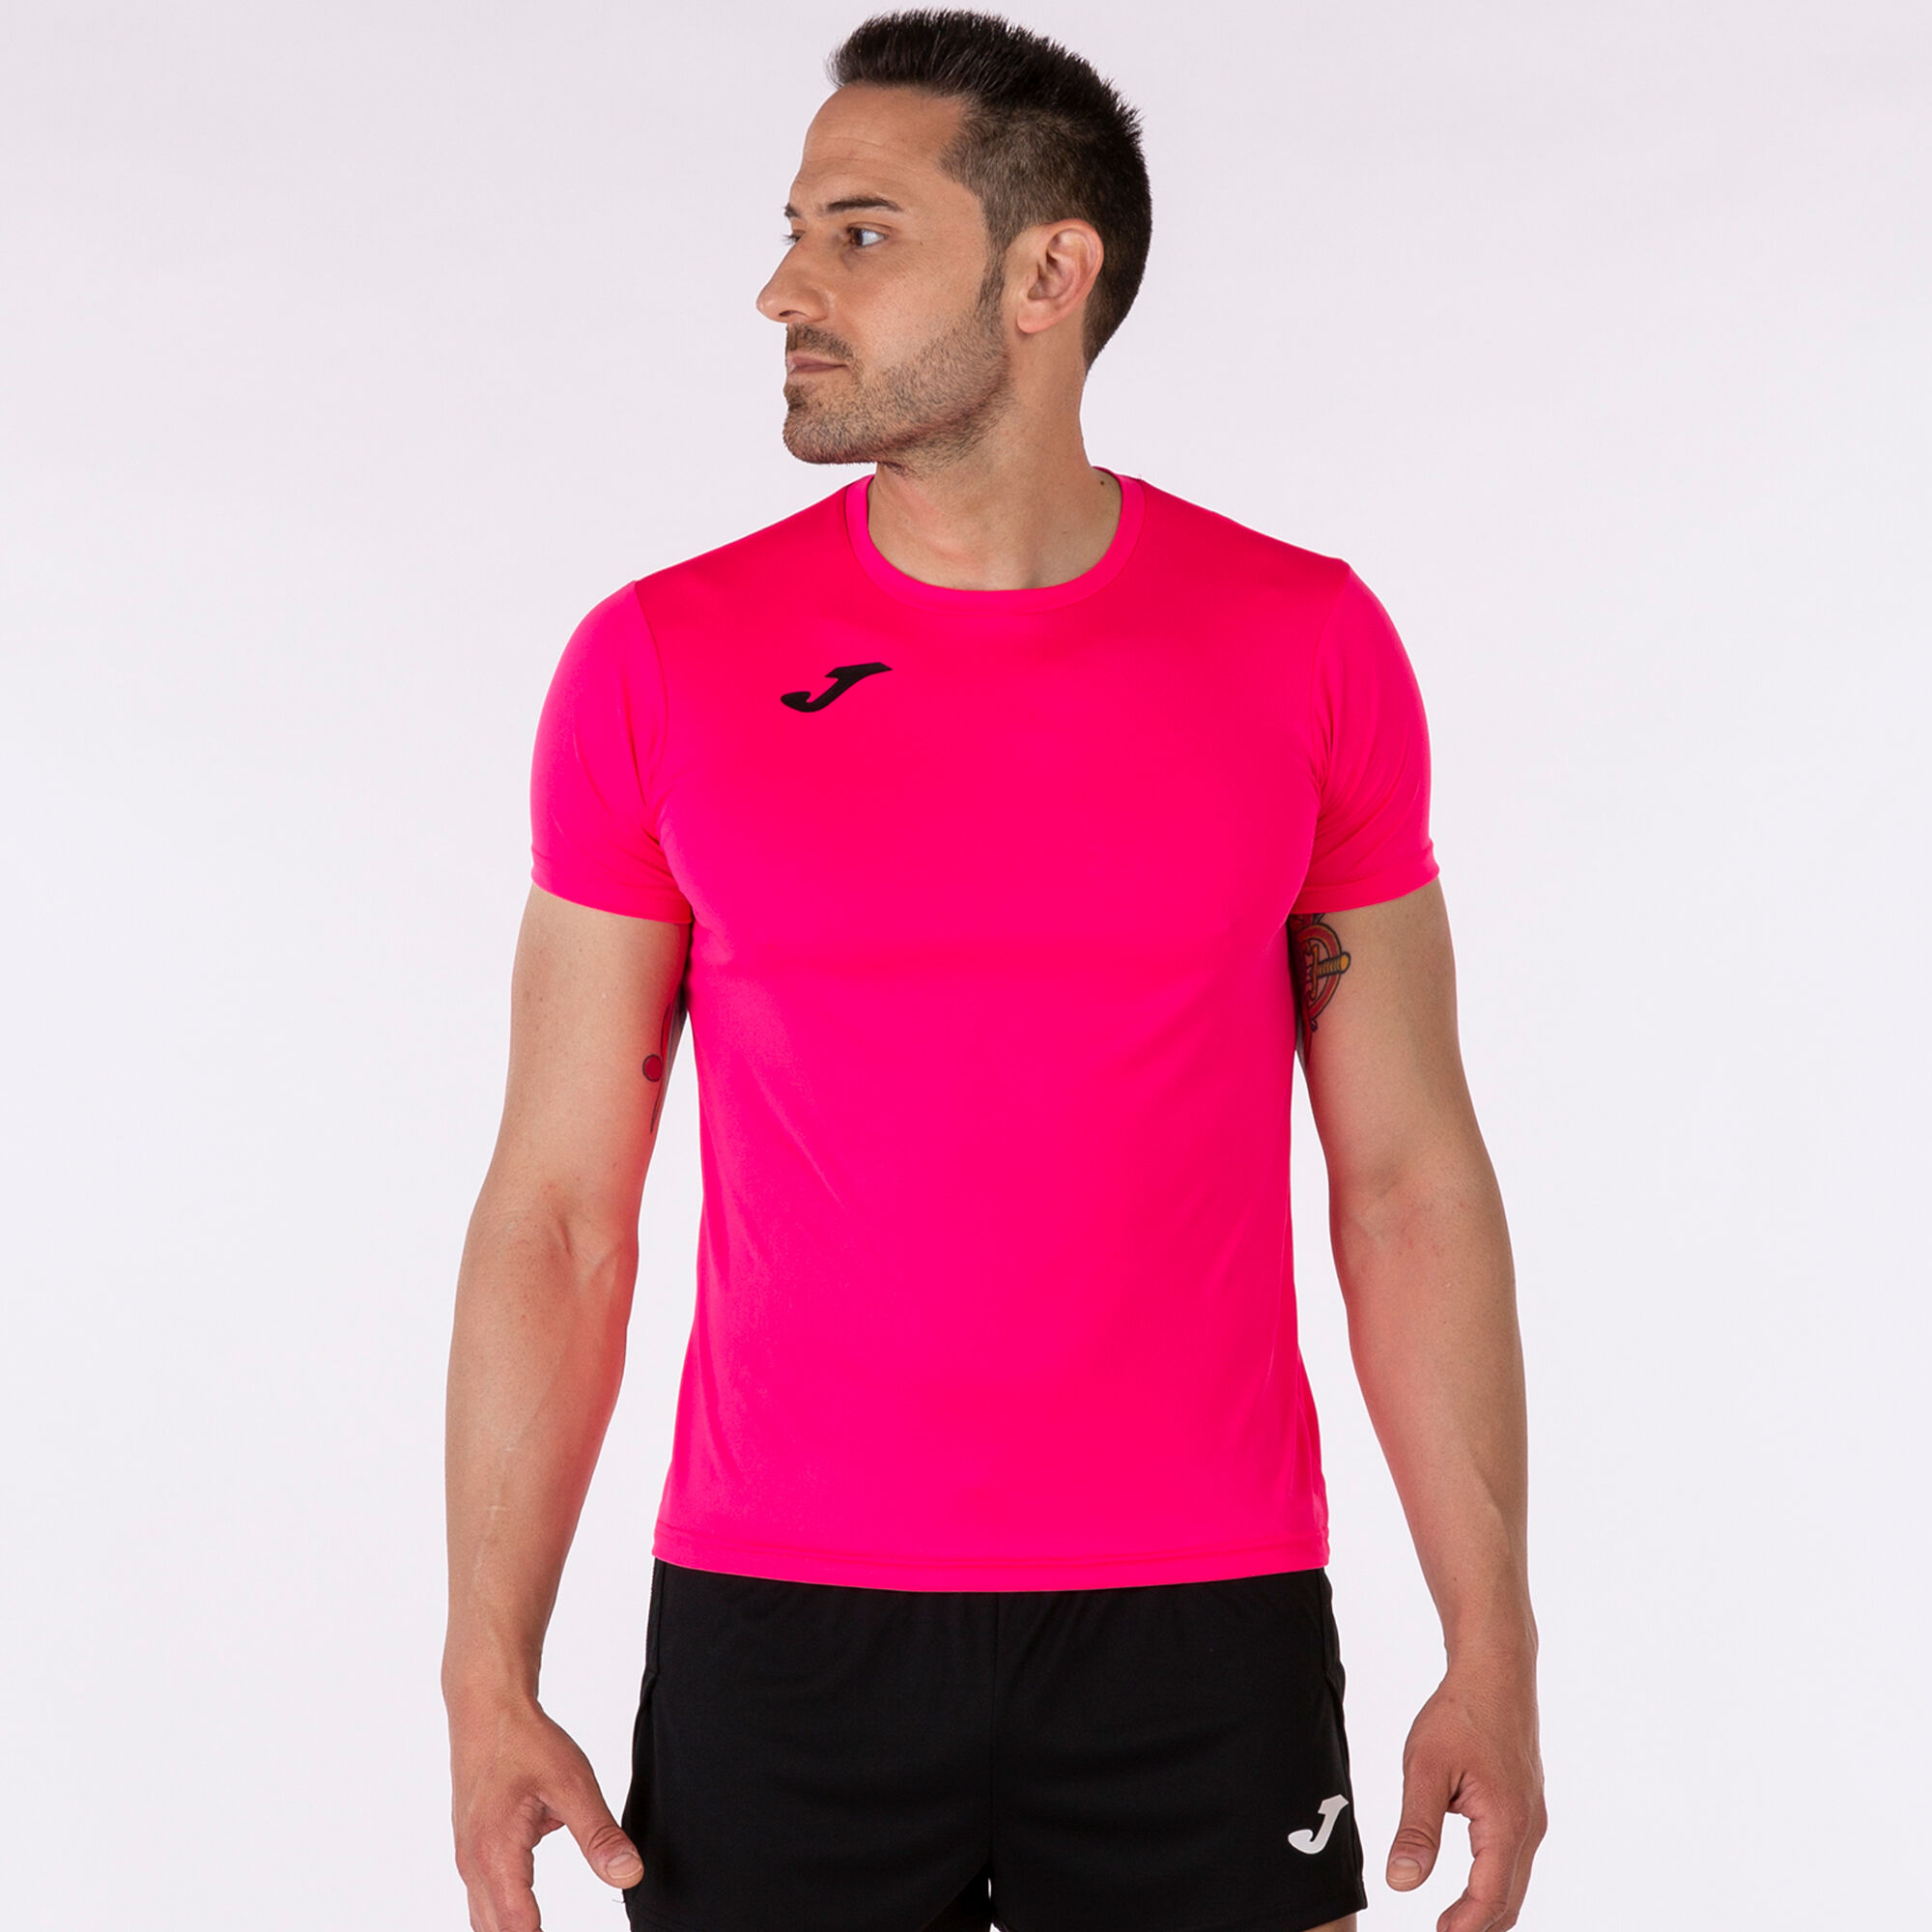 MAILLOT MANCHES COURTES HOMME RECORD II ROSE FLUO